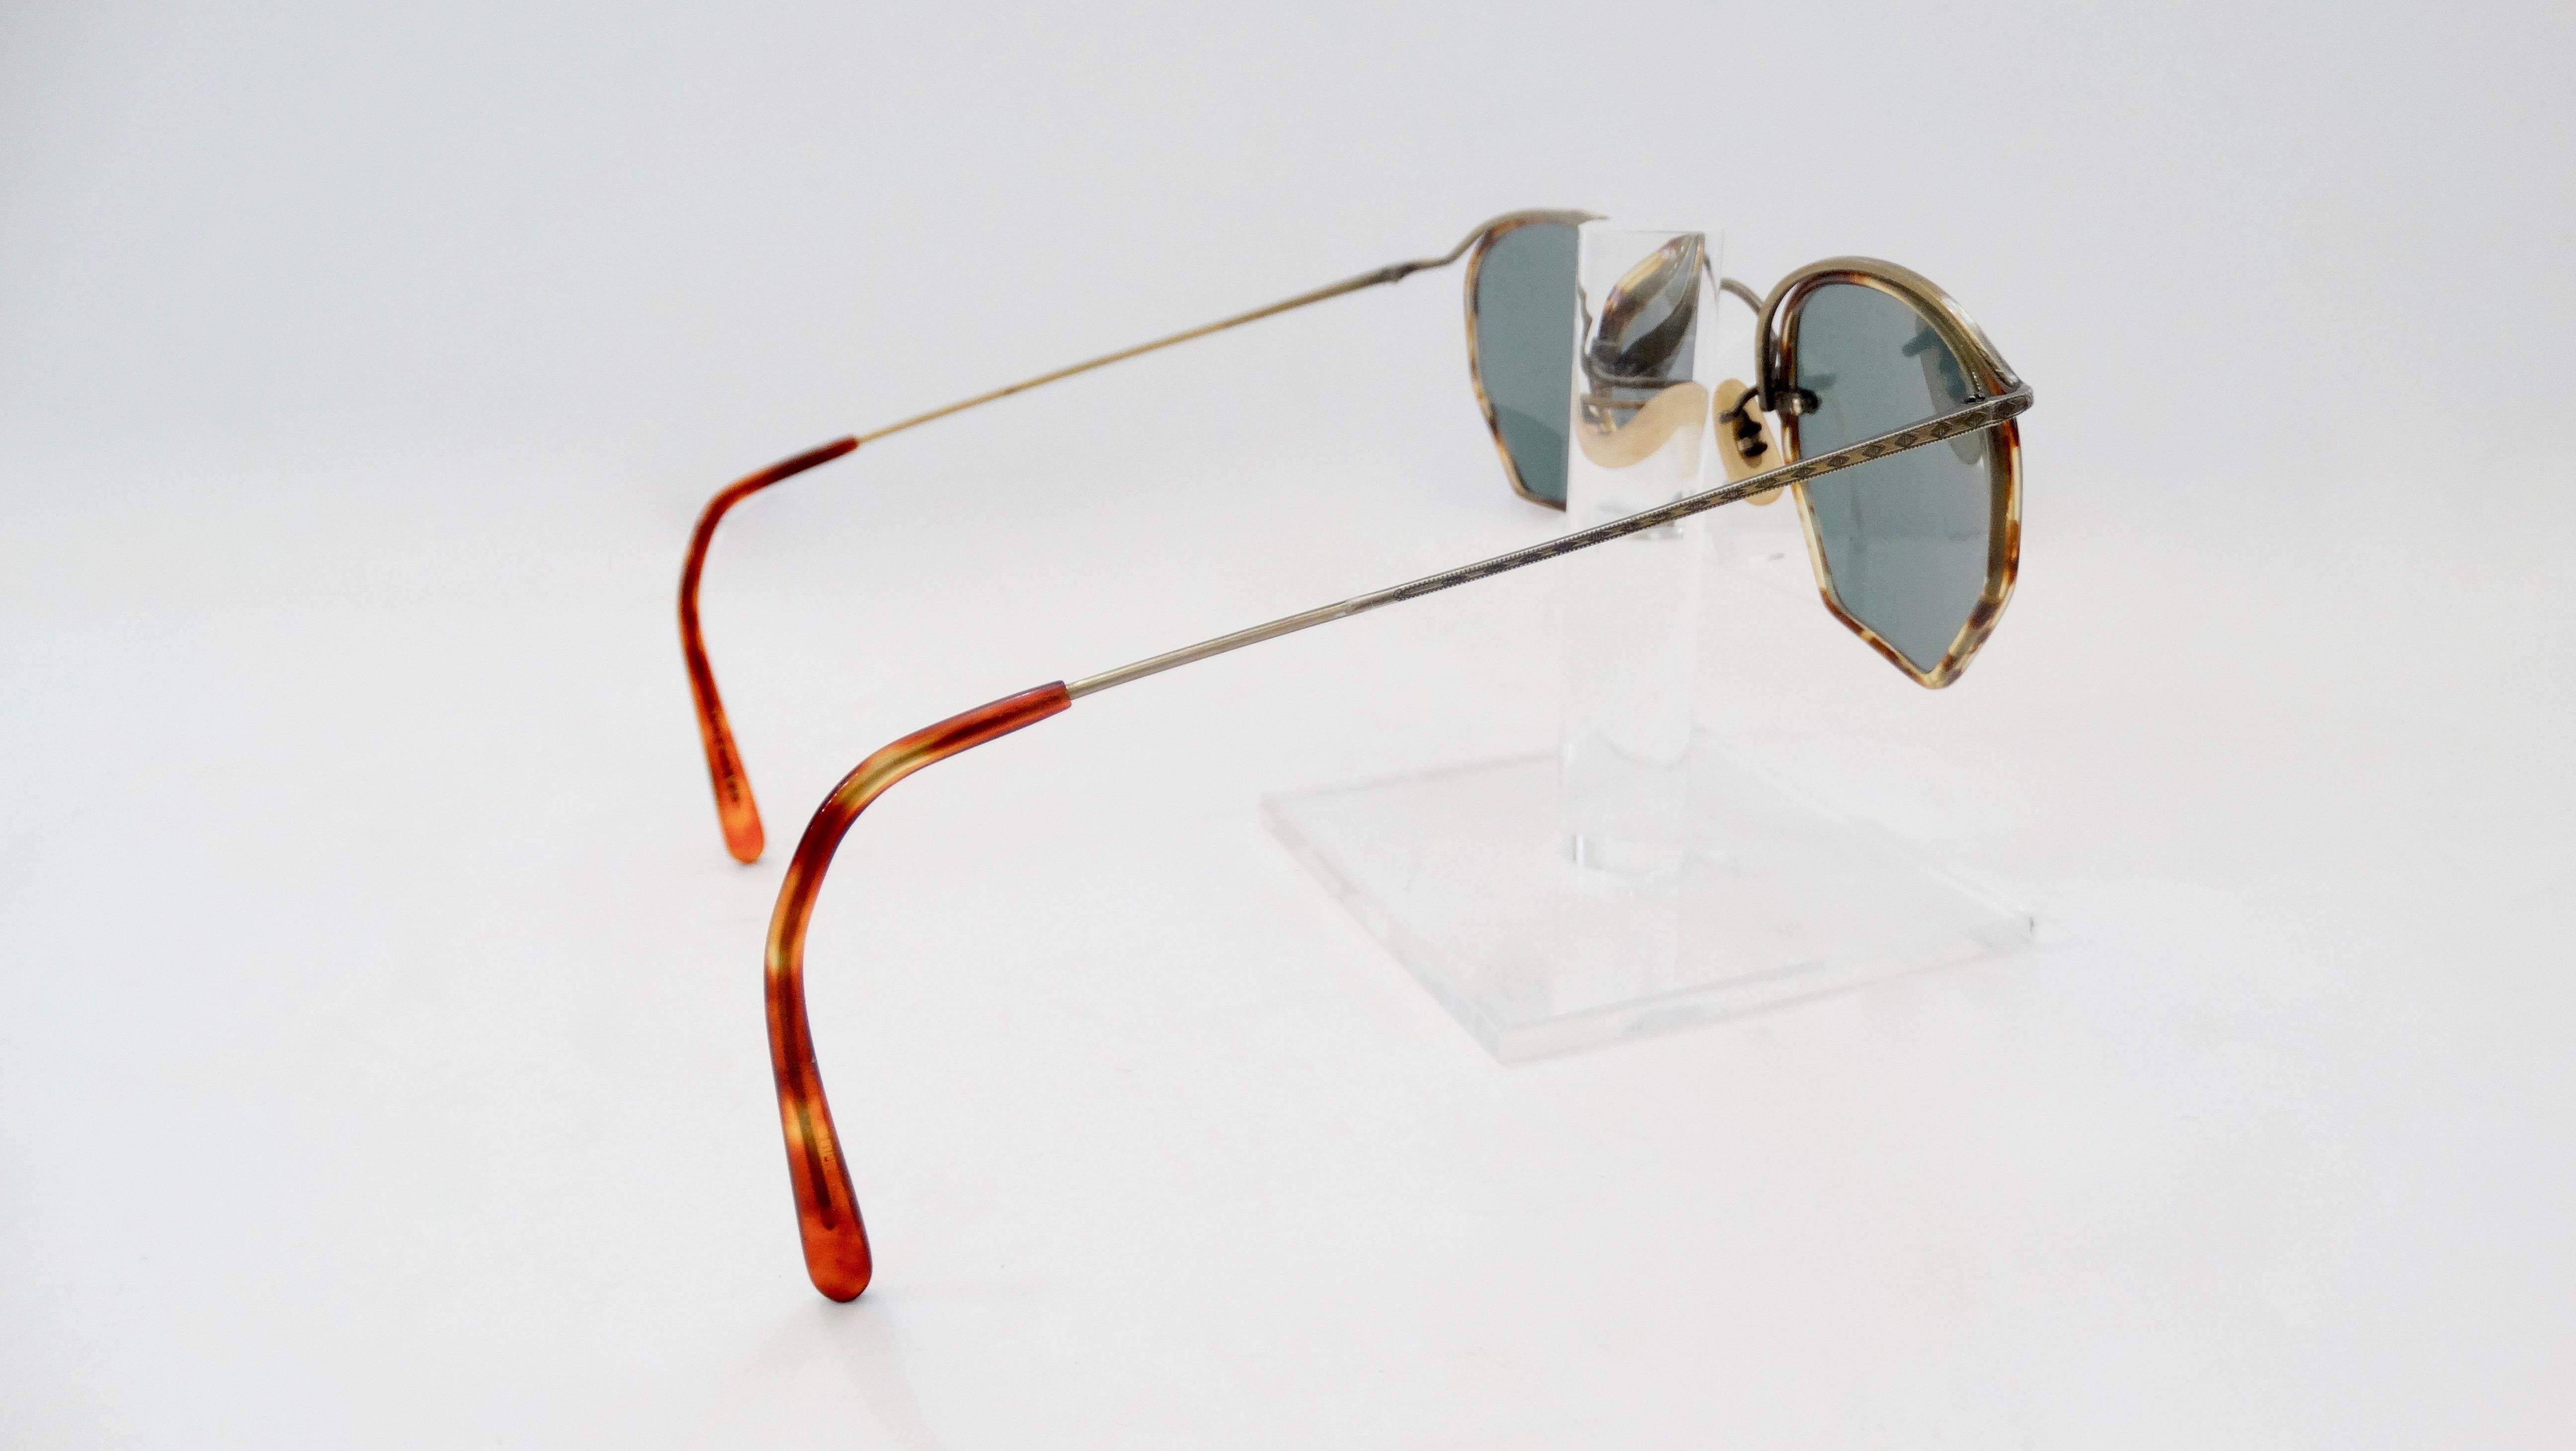 Make a statement with these Oliver Peoples sunglasses! Circa late 1980s, these sunglasses feature a rounded hexagon frame with a tortoise shell finish. Includes silver hardware embossed with a decorative design. The perfect pair of funky sunglasses